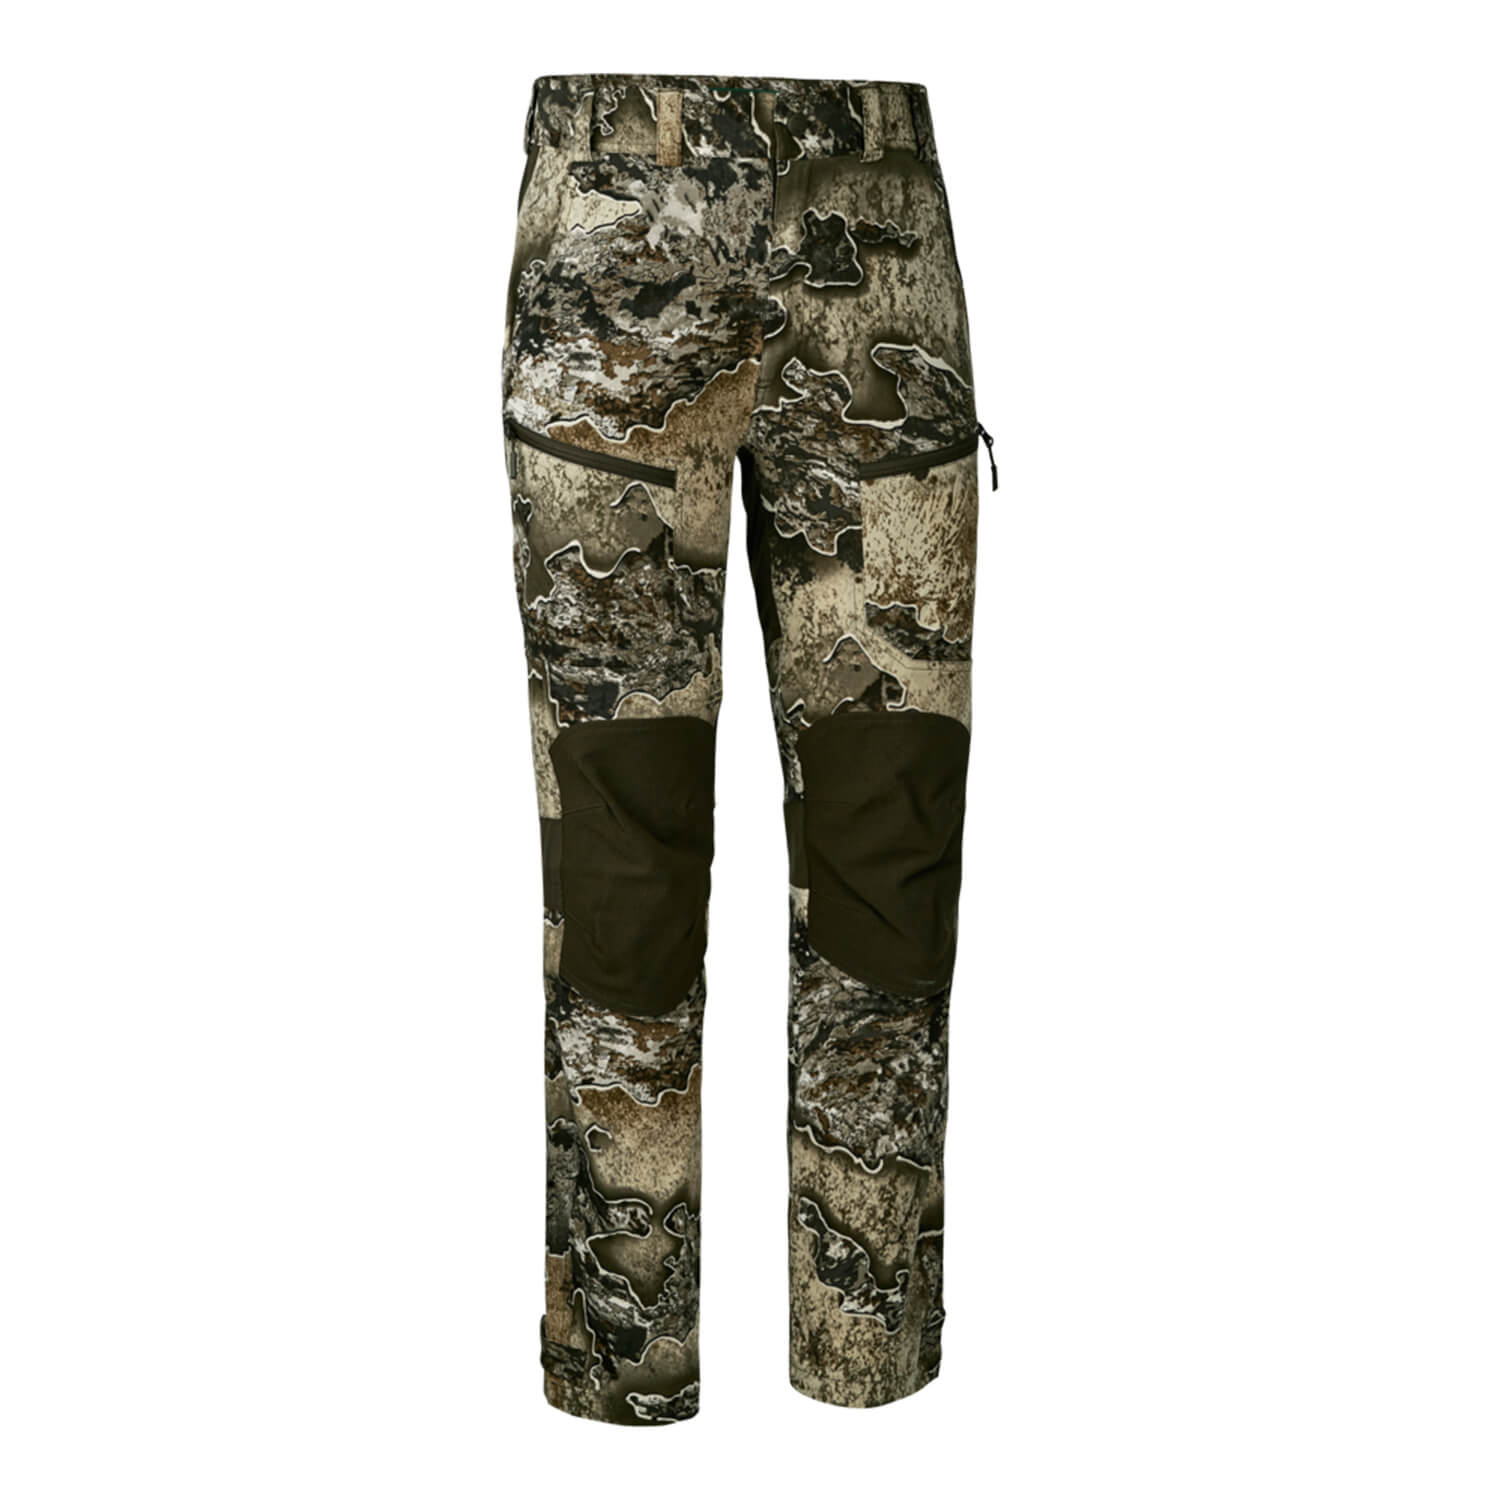 Deerhunter Trousers Excape Light (Realtree Excape) - Camouflage Clothing